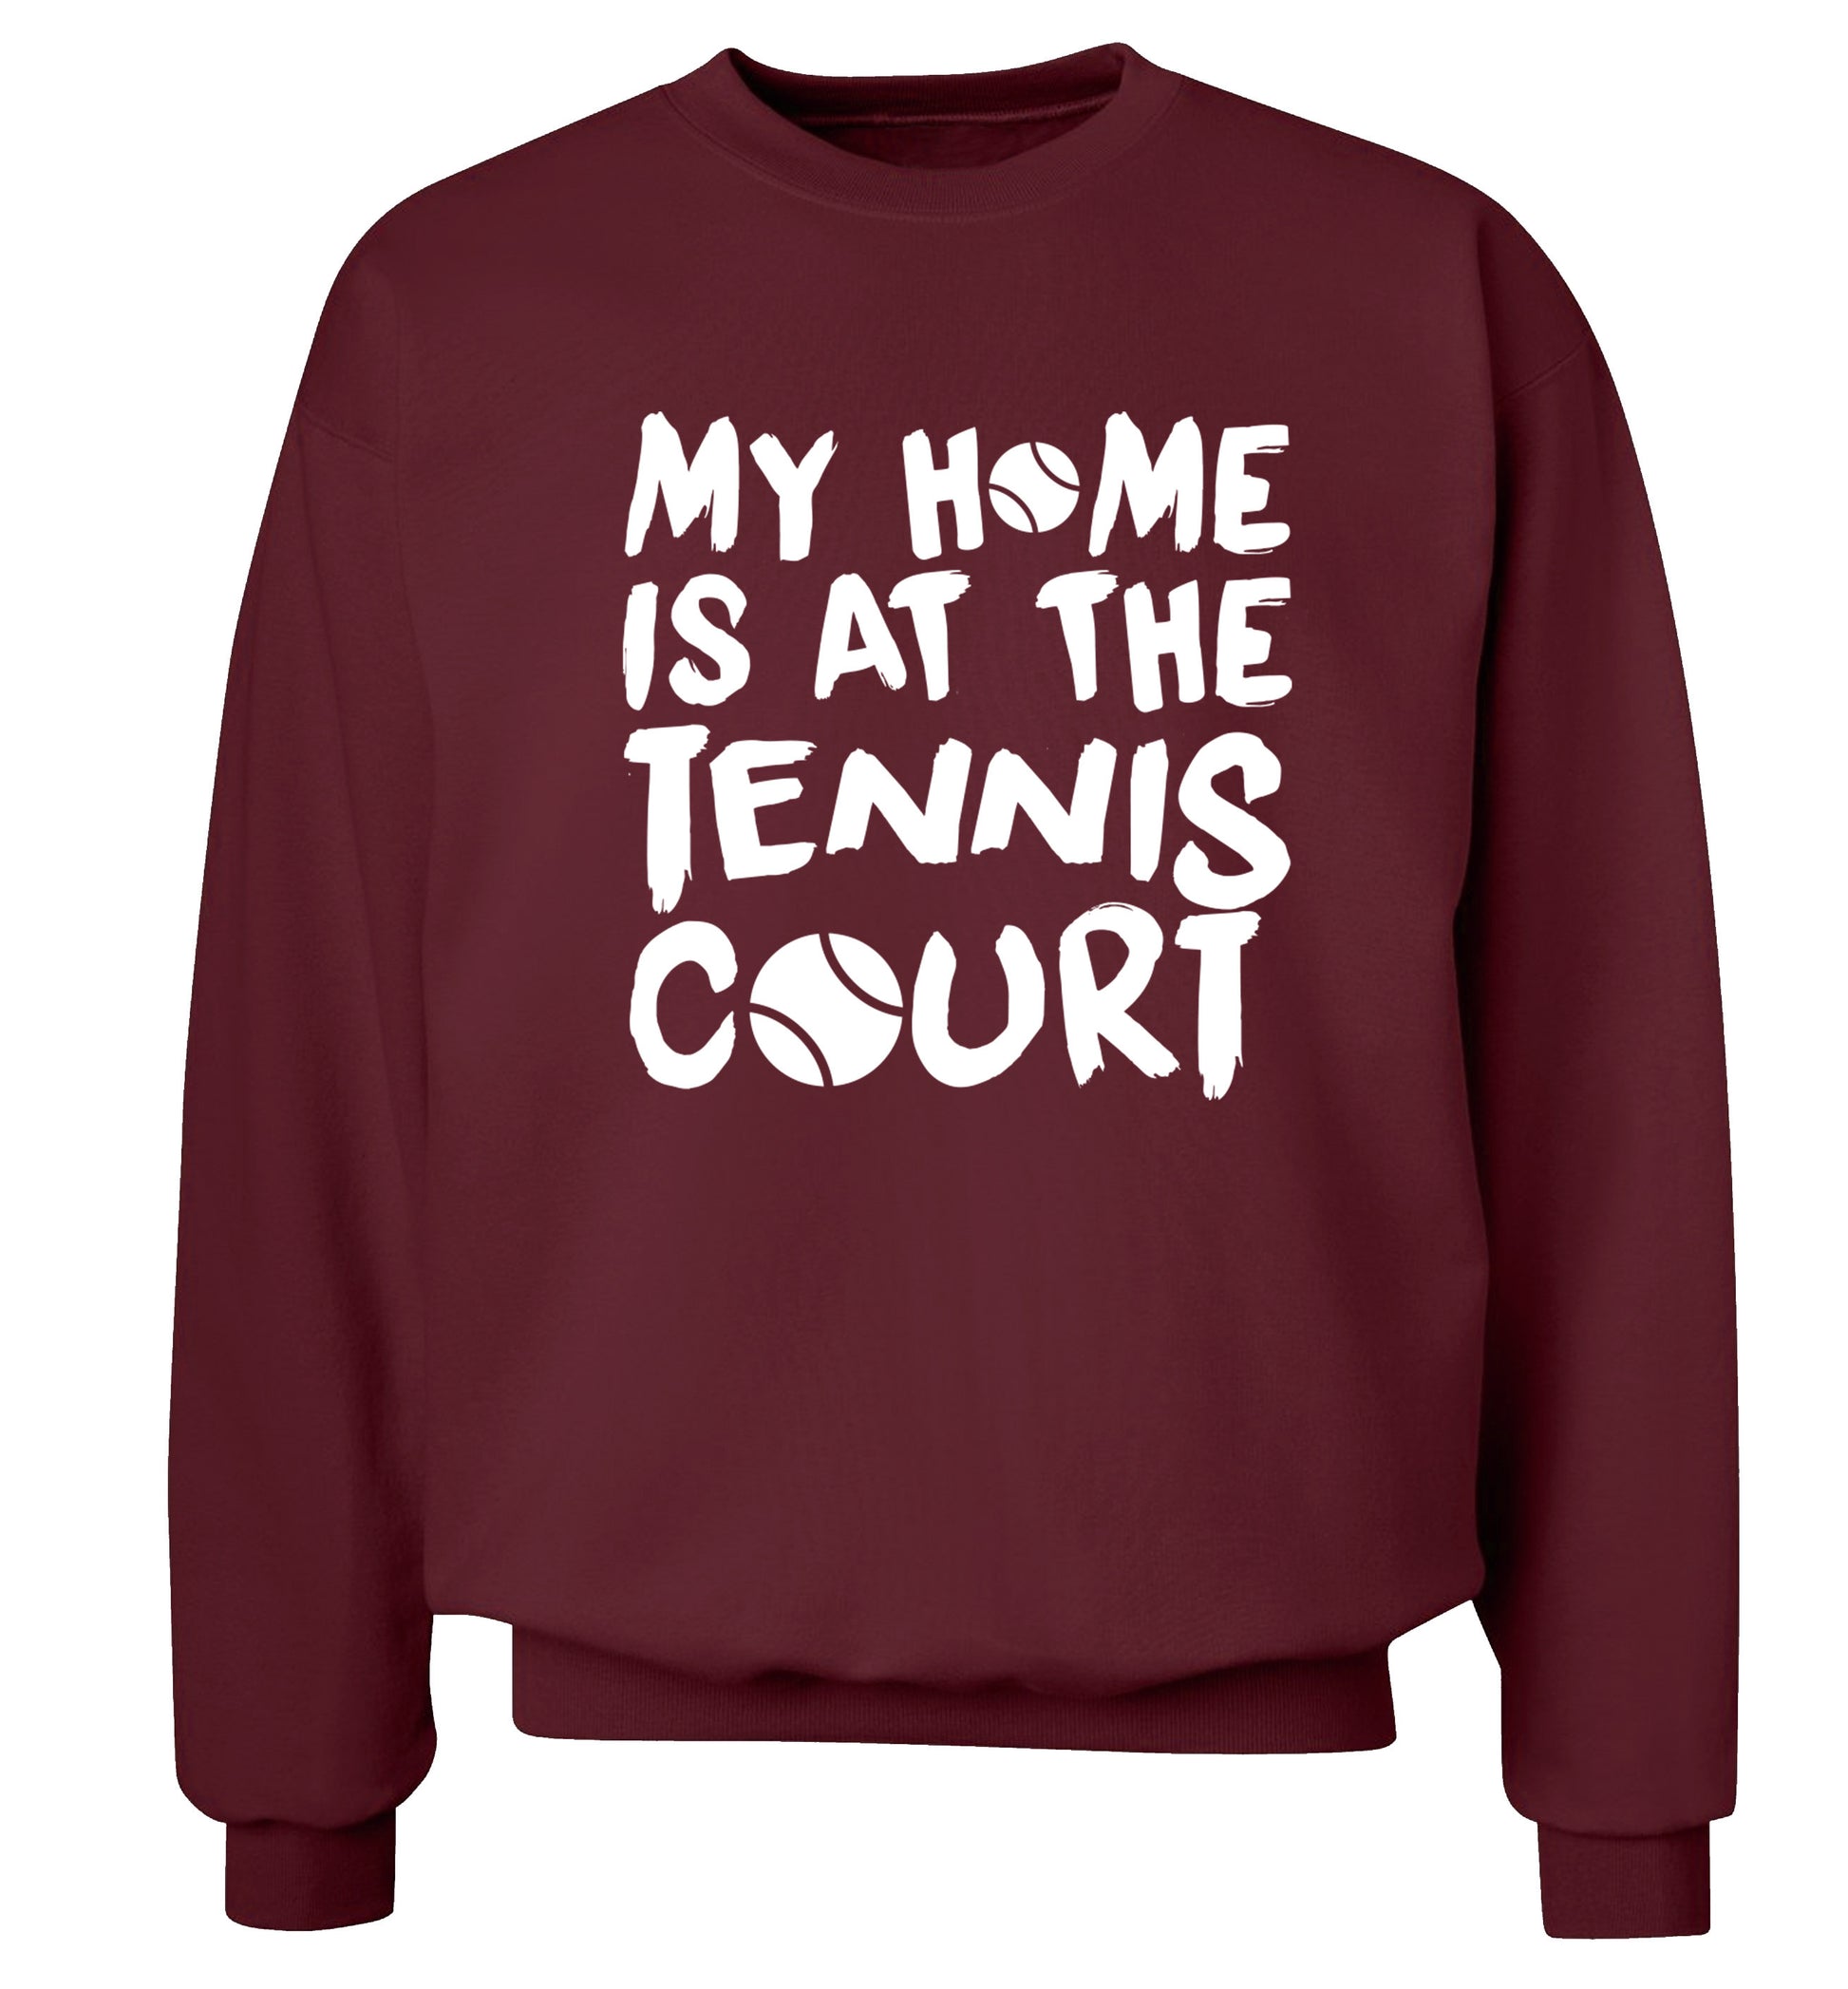 My home is at the tennis court Adult's unisex maroon Sweater 2XL